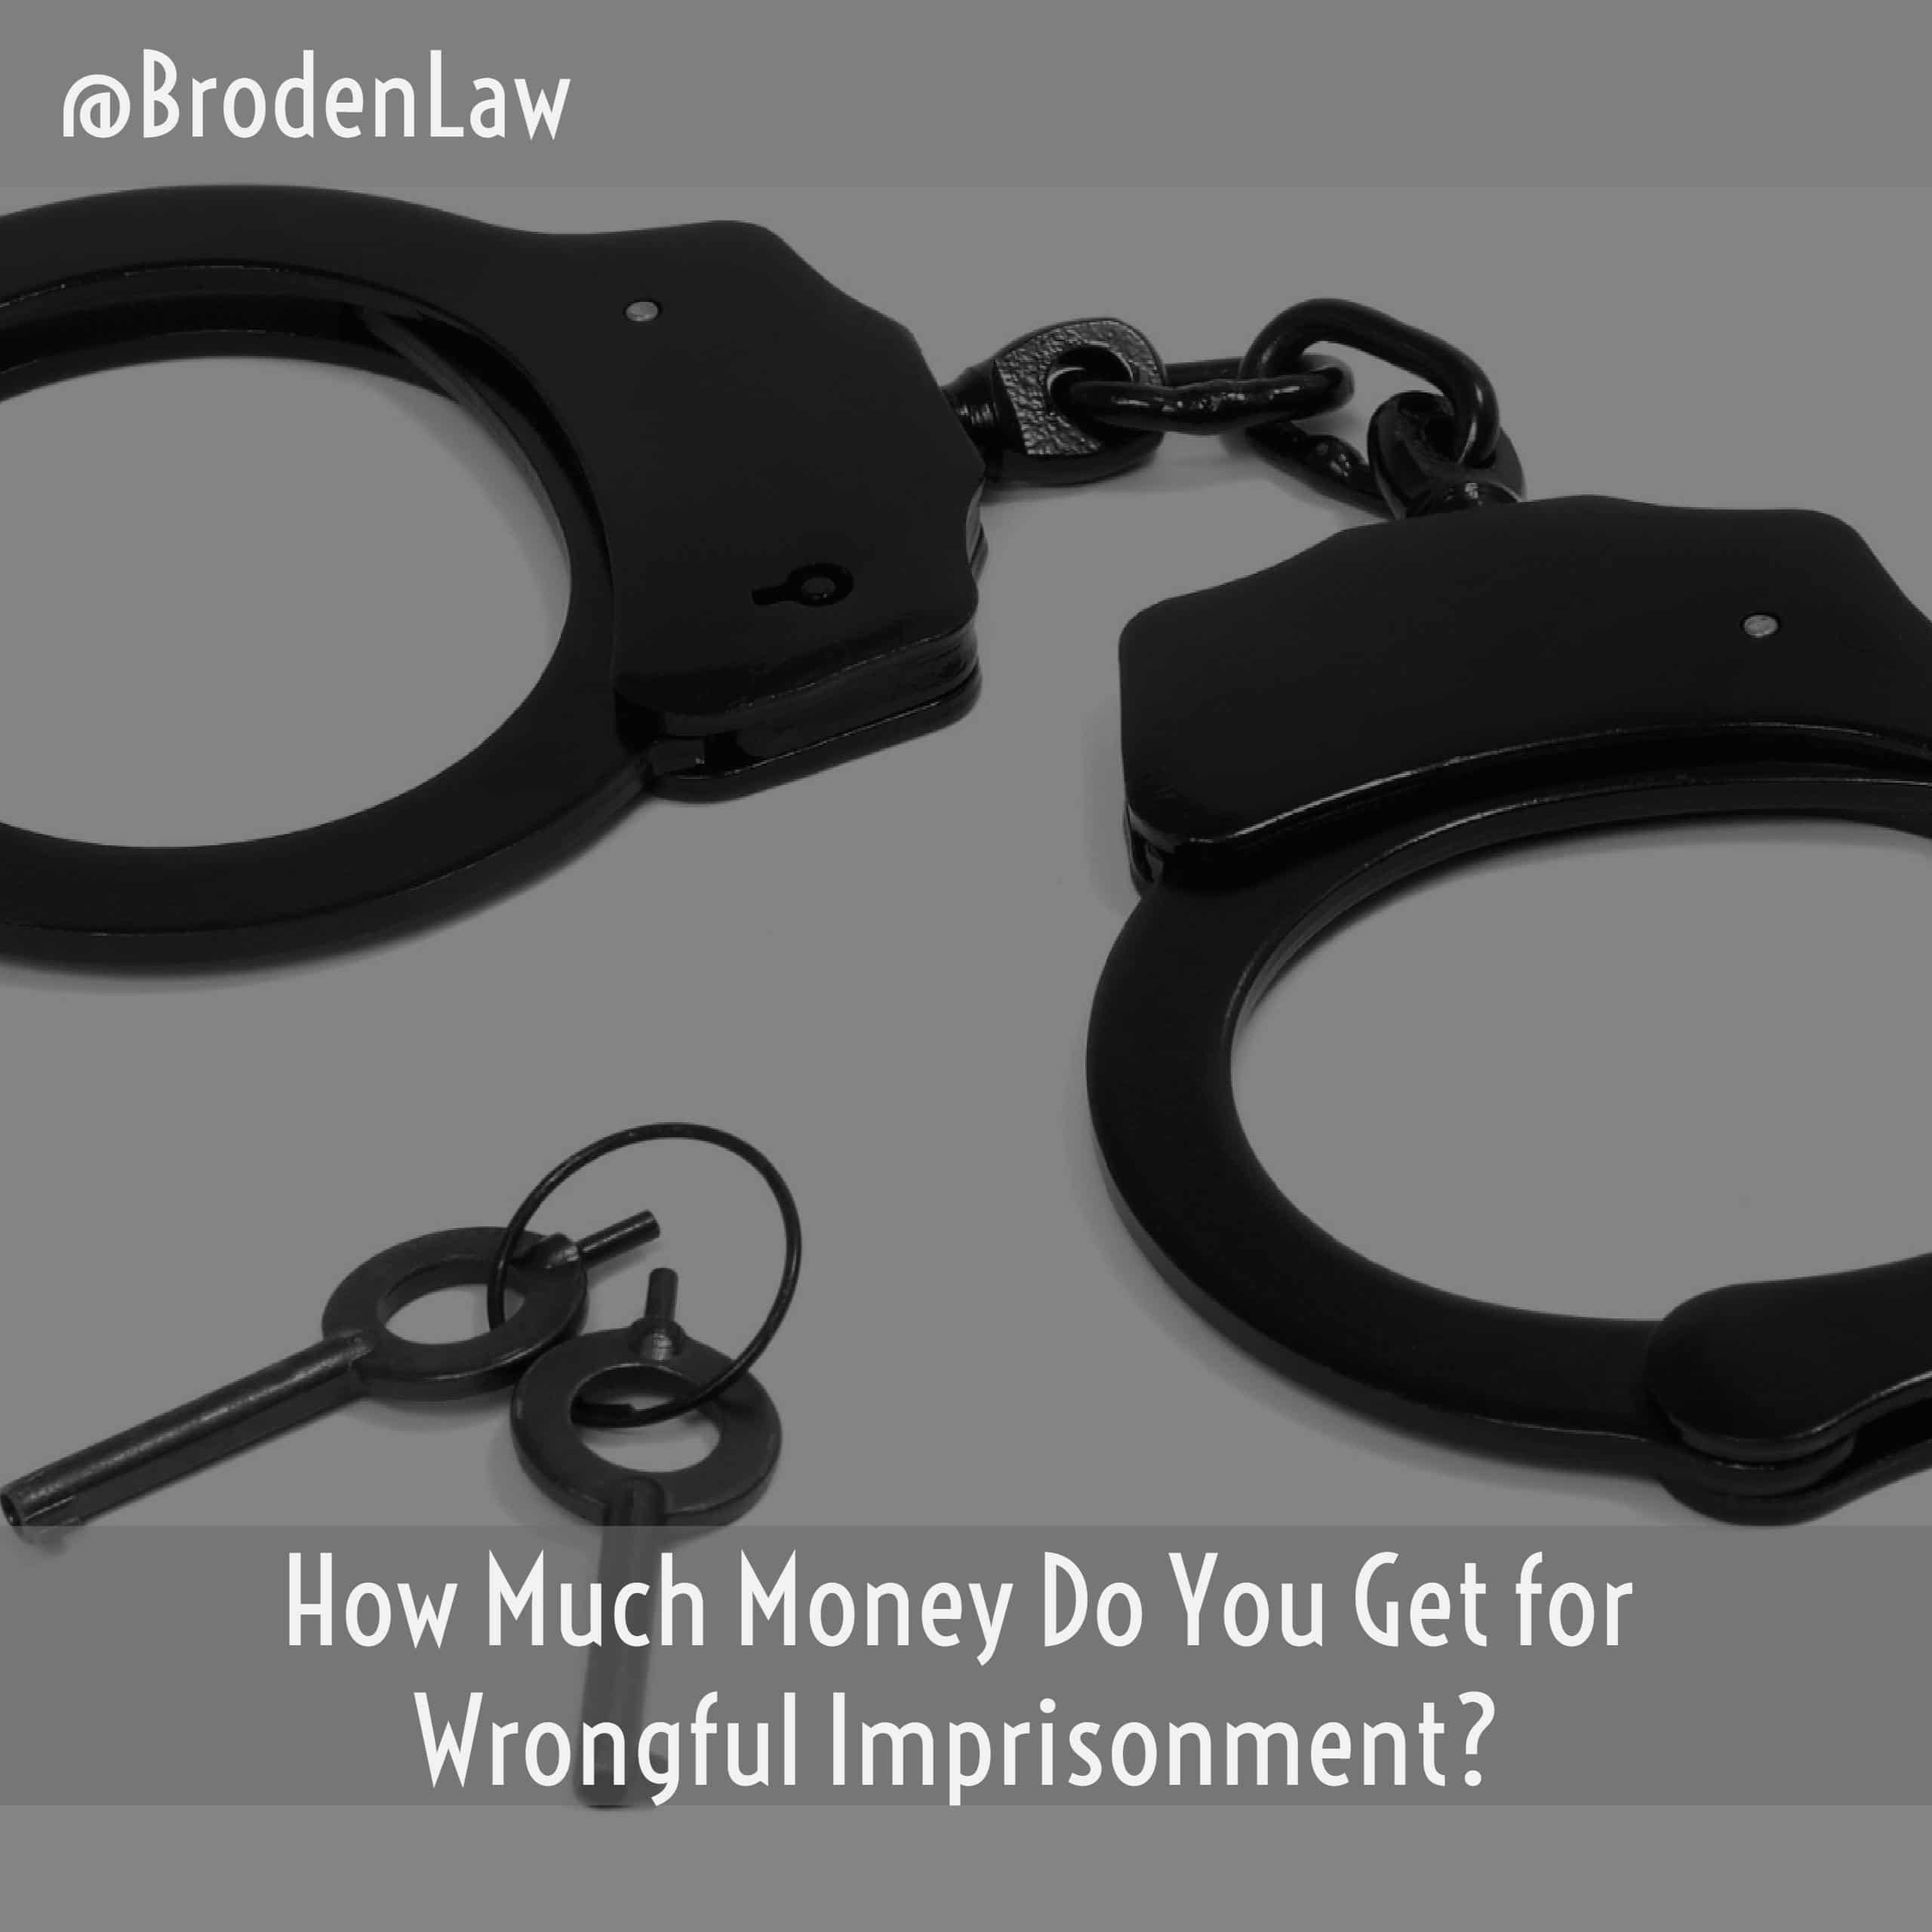 How Much Money Do You Get for Wrongful Imprisonment